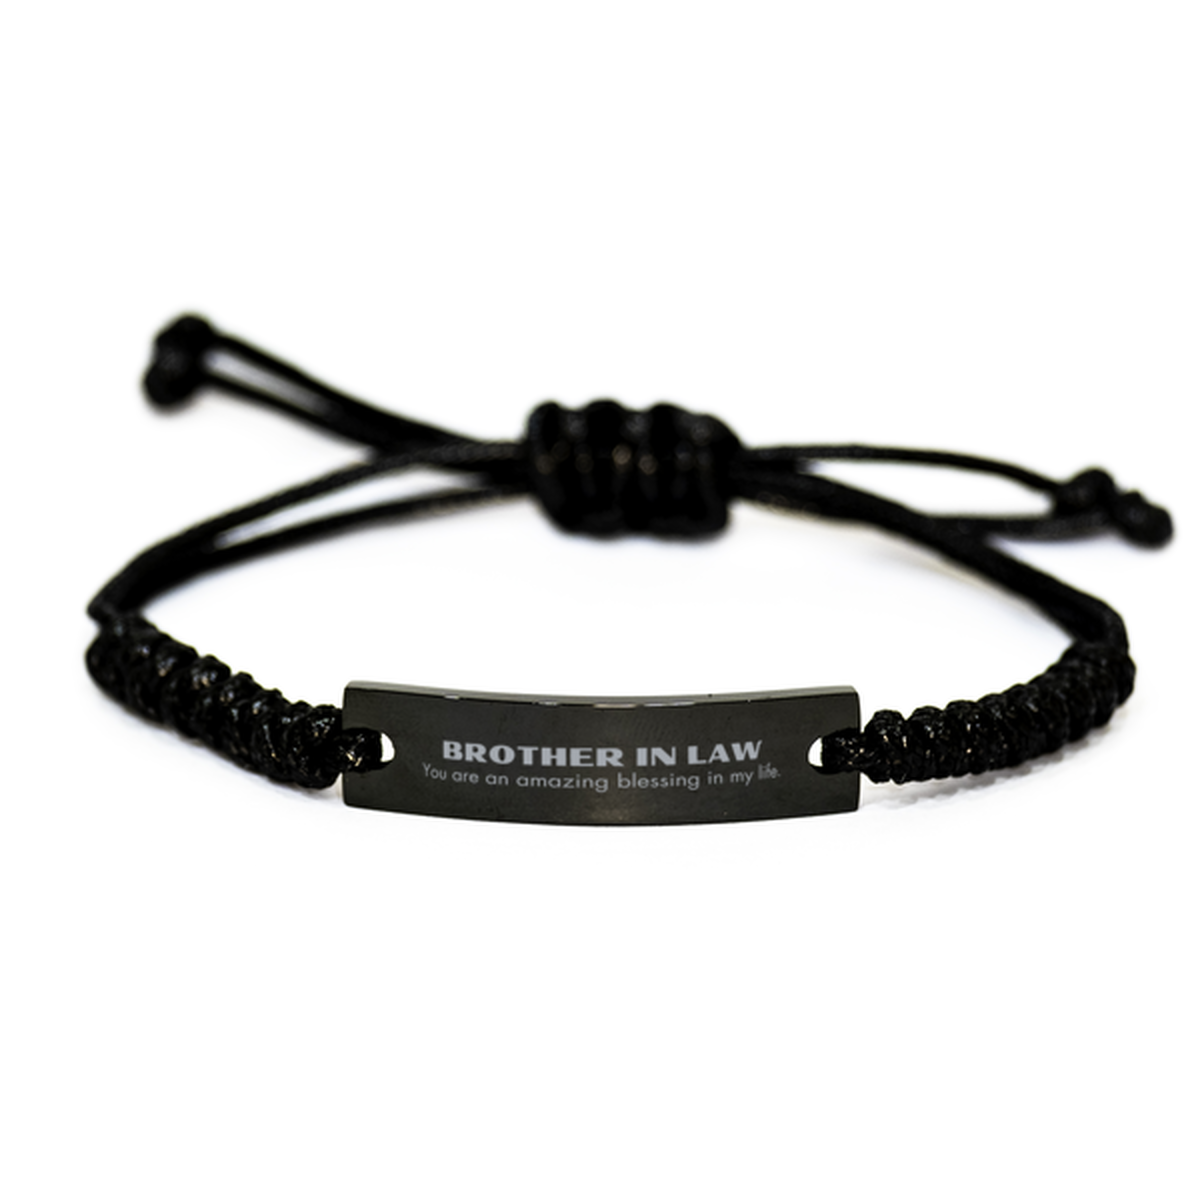 Brother In Law Black Rope Bracelet, You are an amazing blessing in my life, Thank You Gifts For Brother In Law, Inspirational Birthday Christmas Unique Gifts For Brother In Law